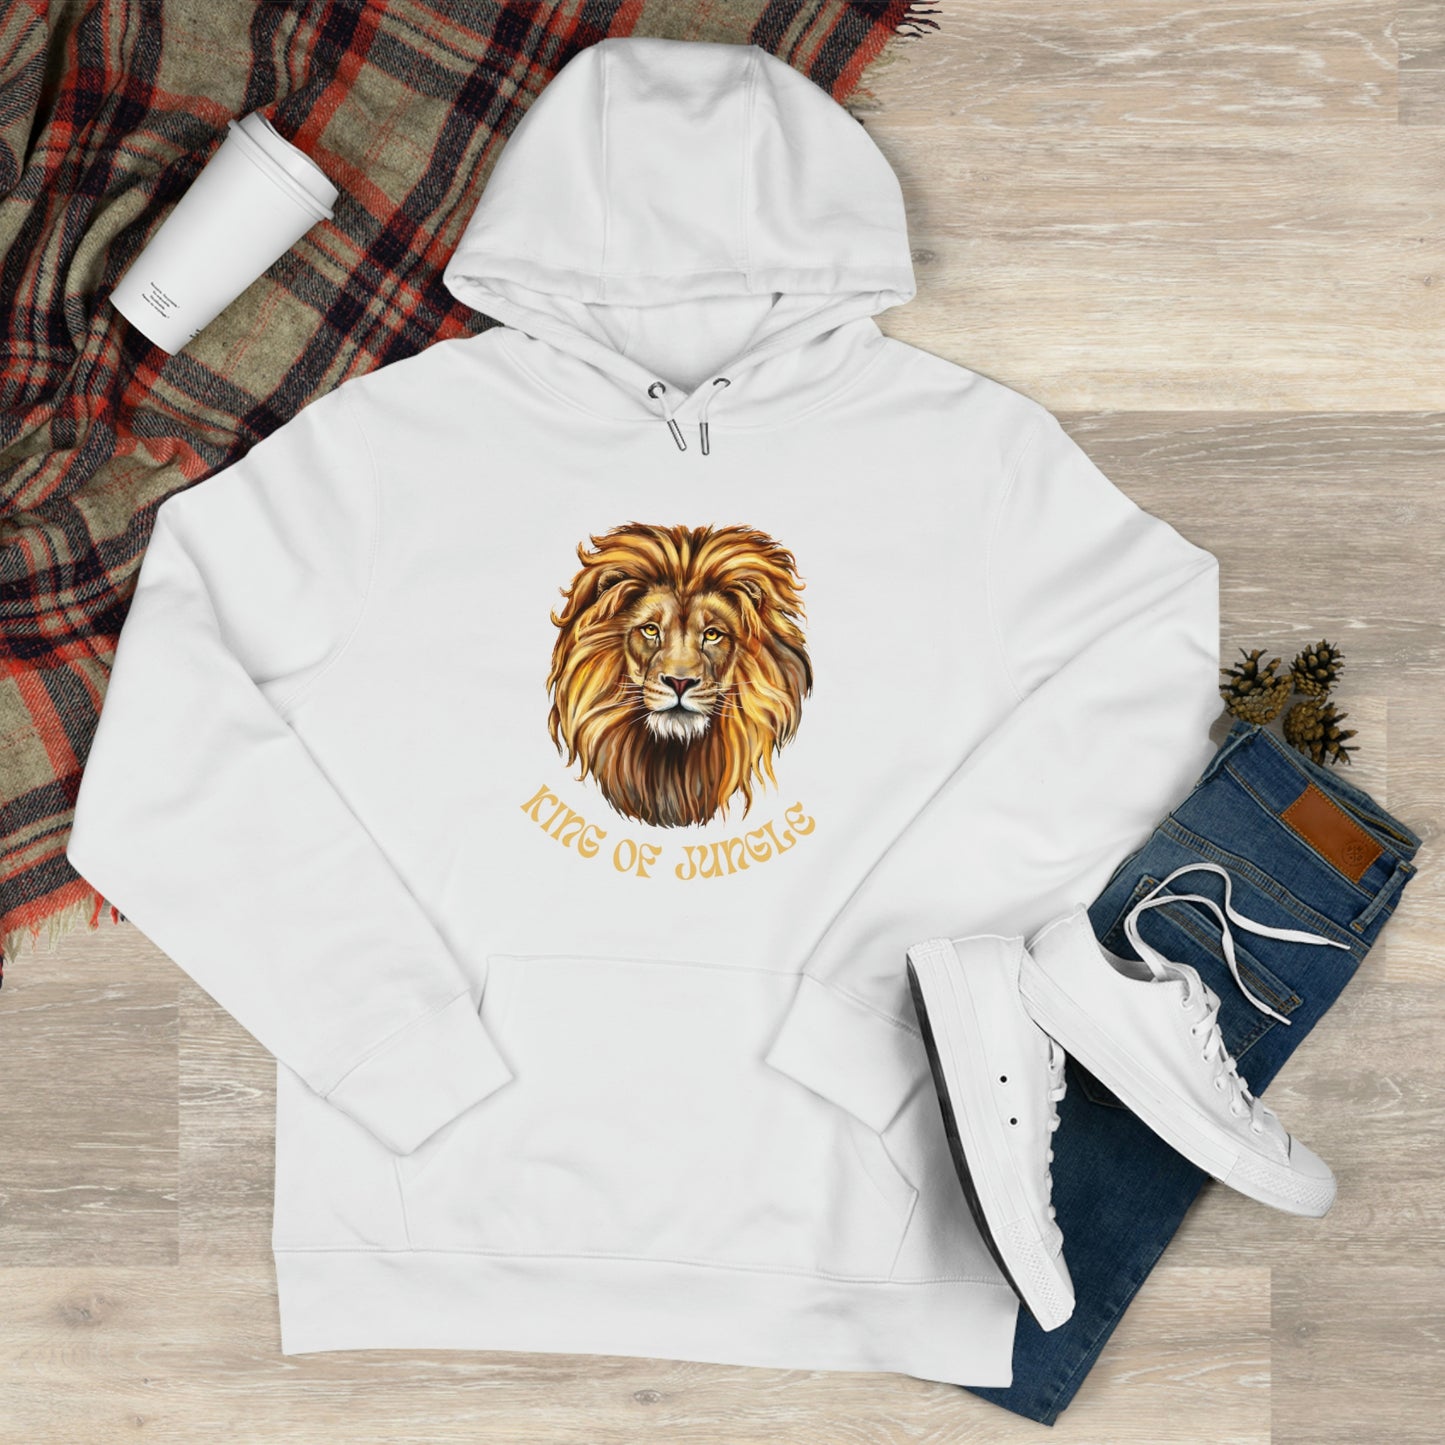 Hoodie Sweatshirt Roar Like the King of the Jungle with Our Lion King Hooded Sweatshirt - Perfect for Any Wildlife Enthusiast!